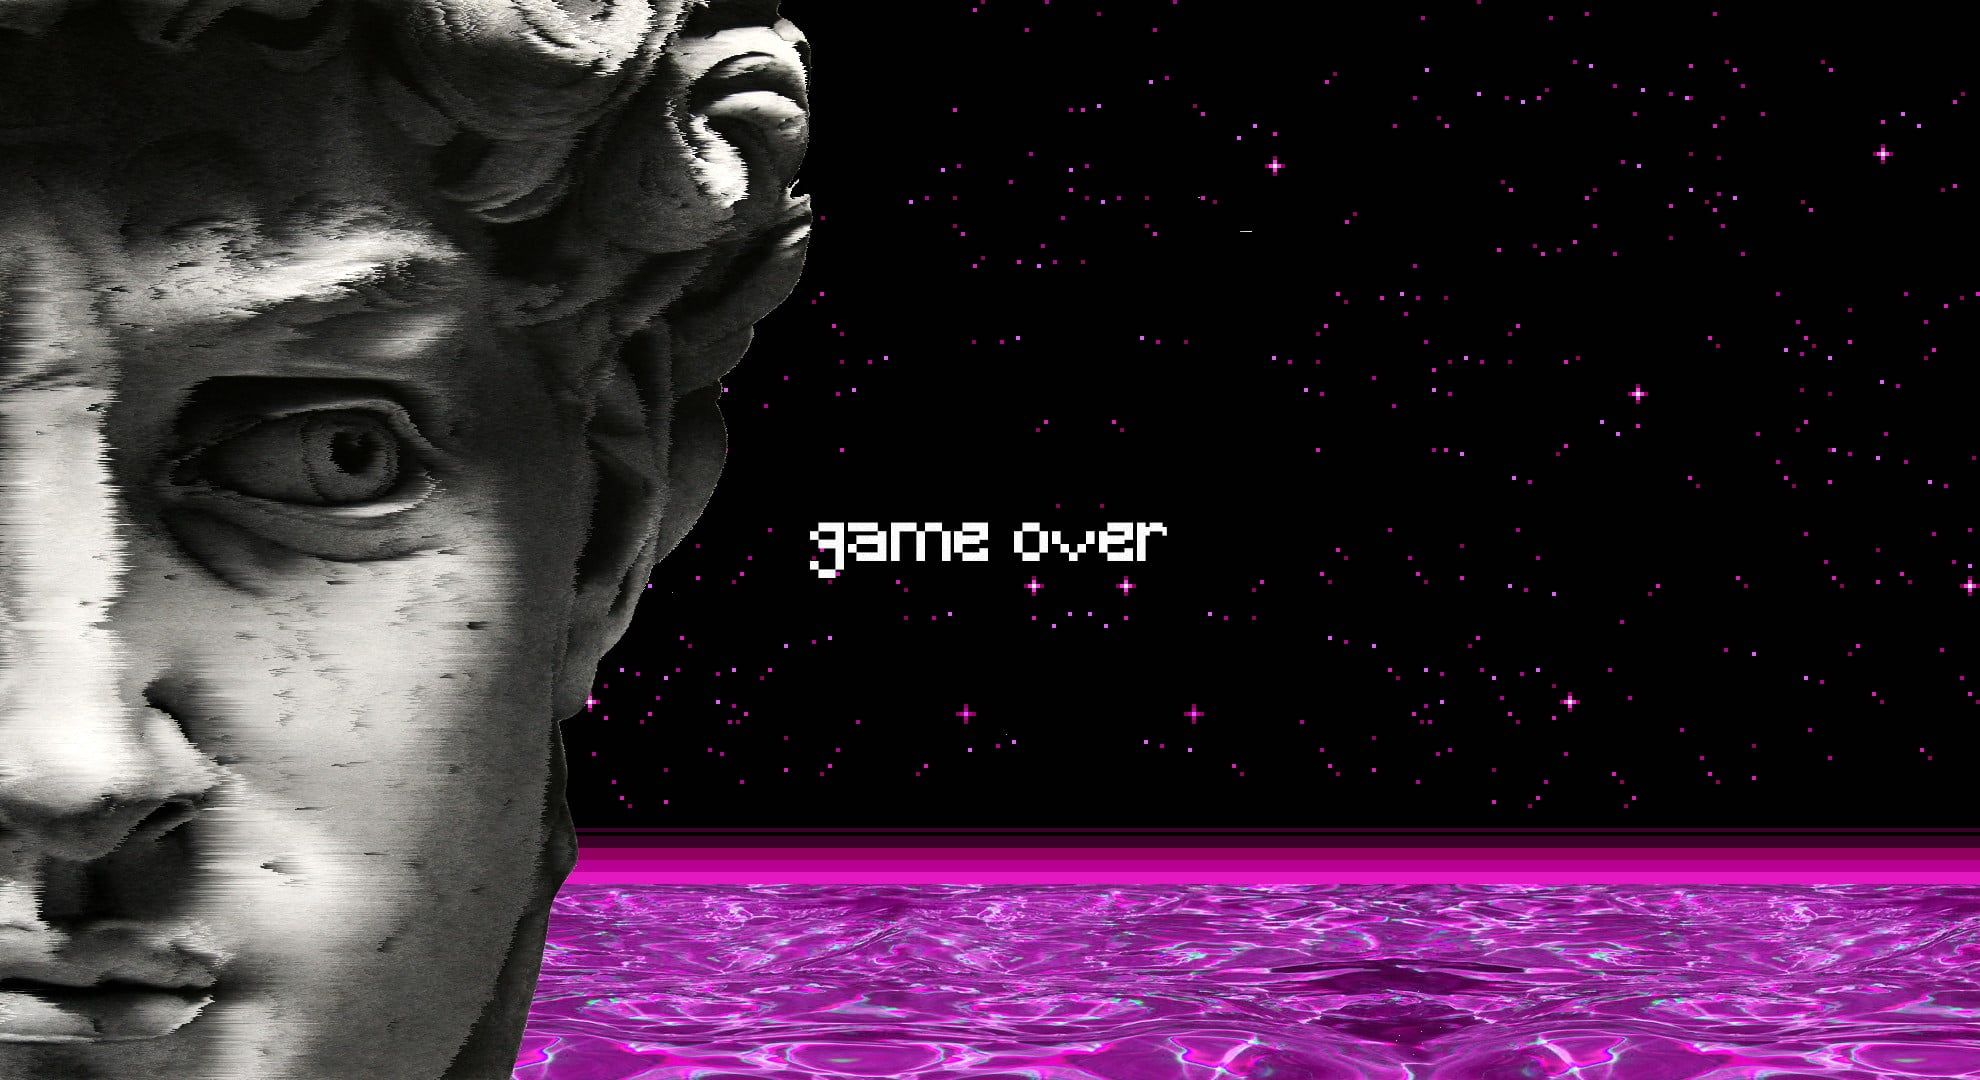 Game over screen with a sculpture of David's face on the left - Greek statue, dark vaporwave